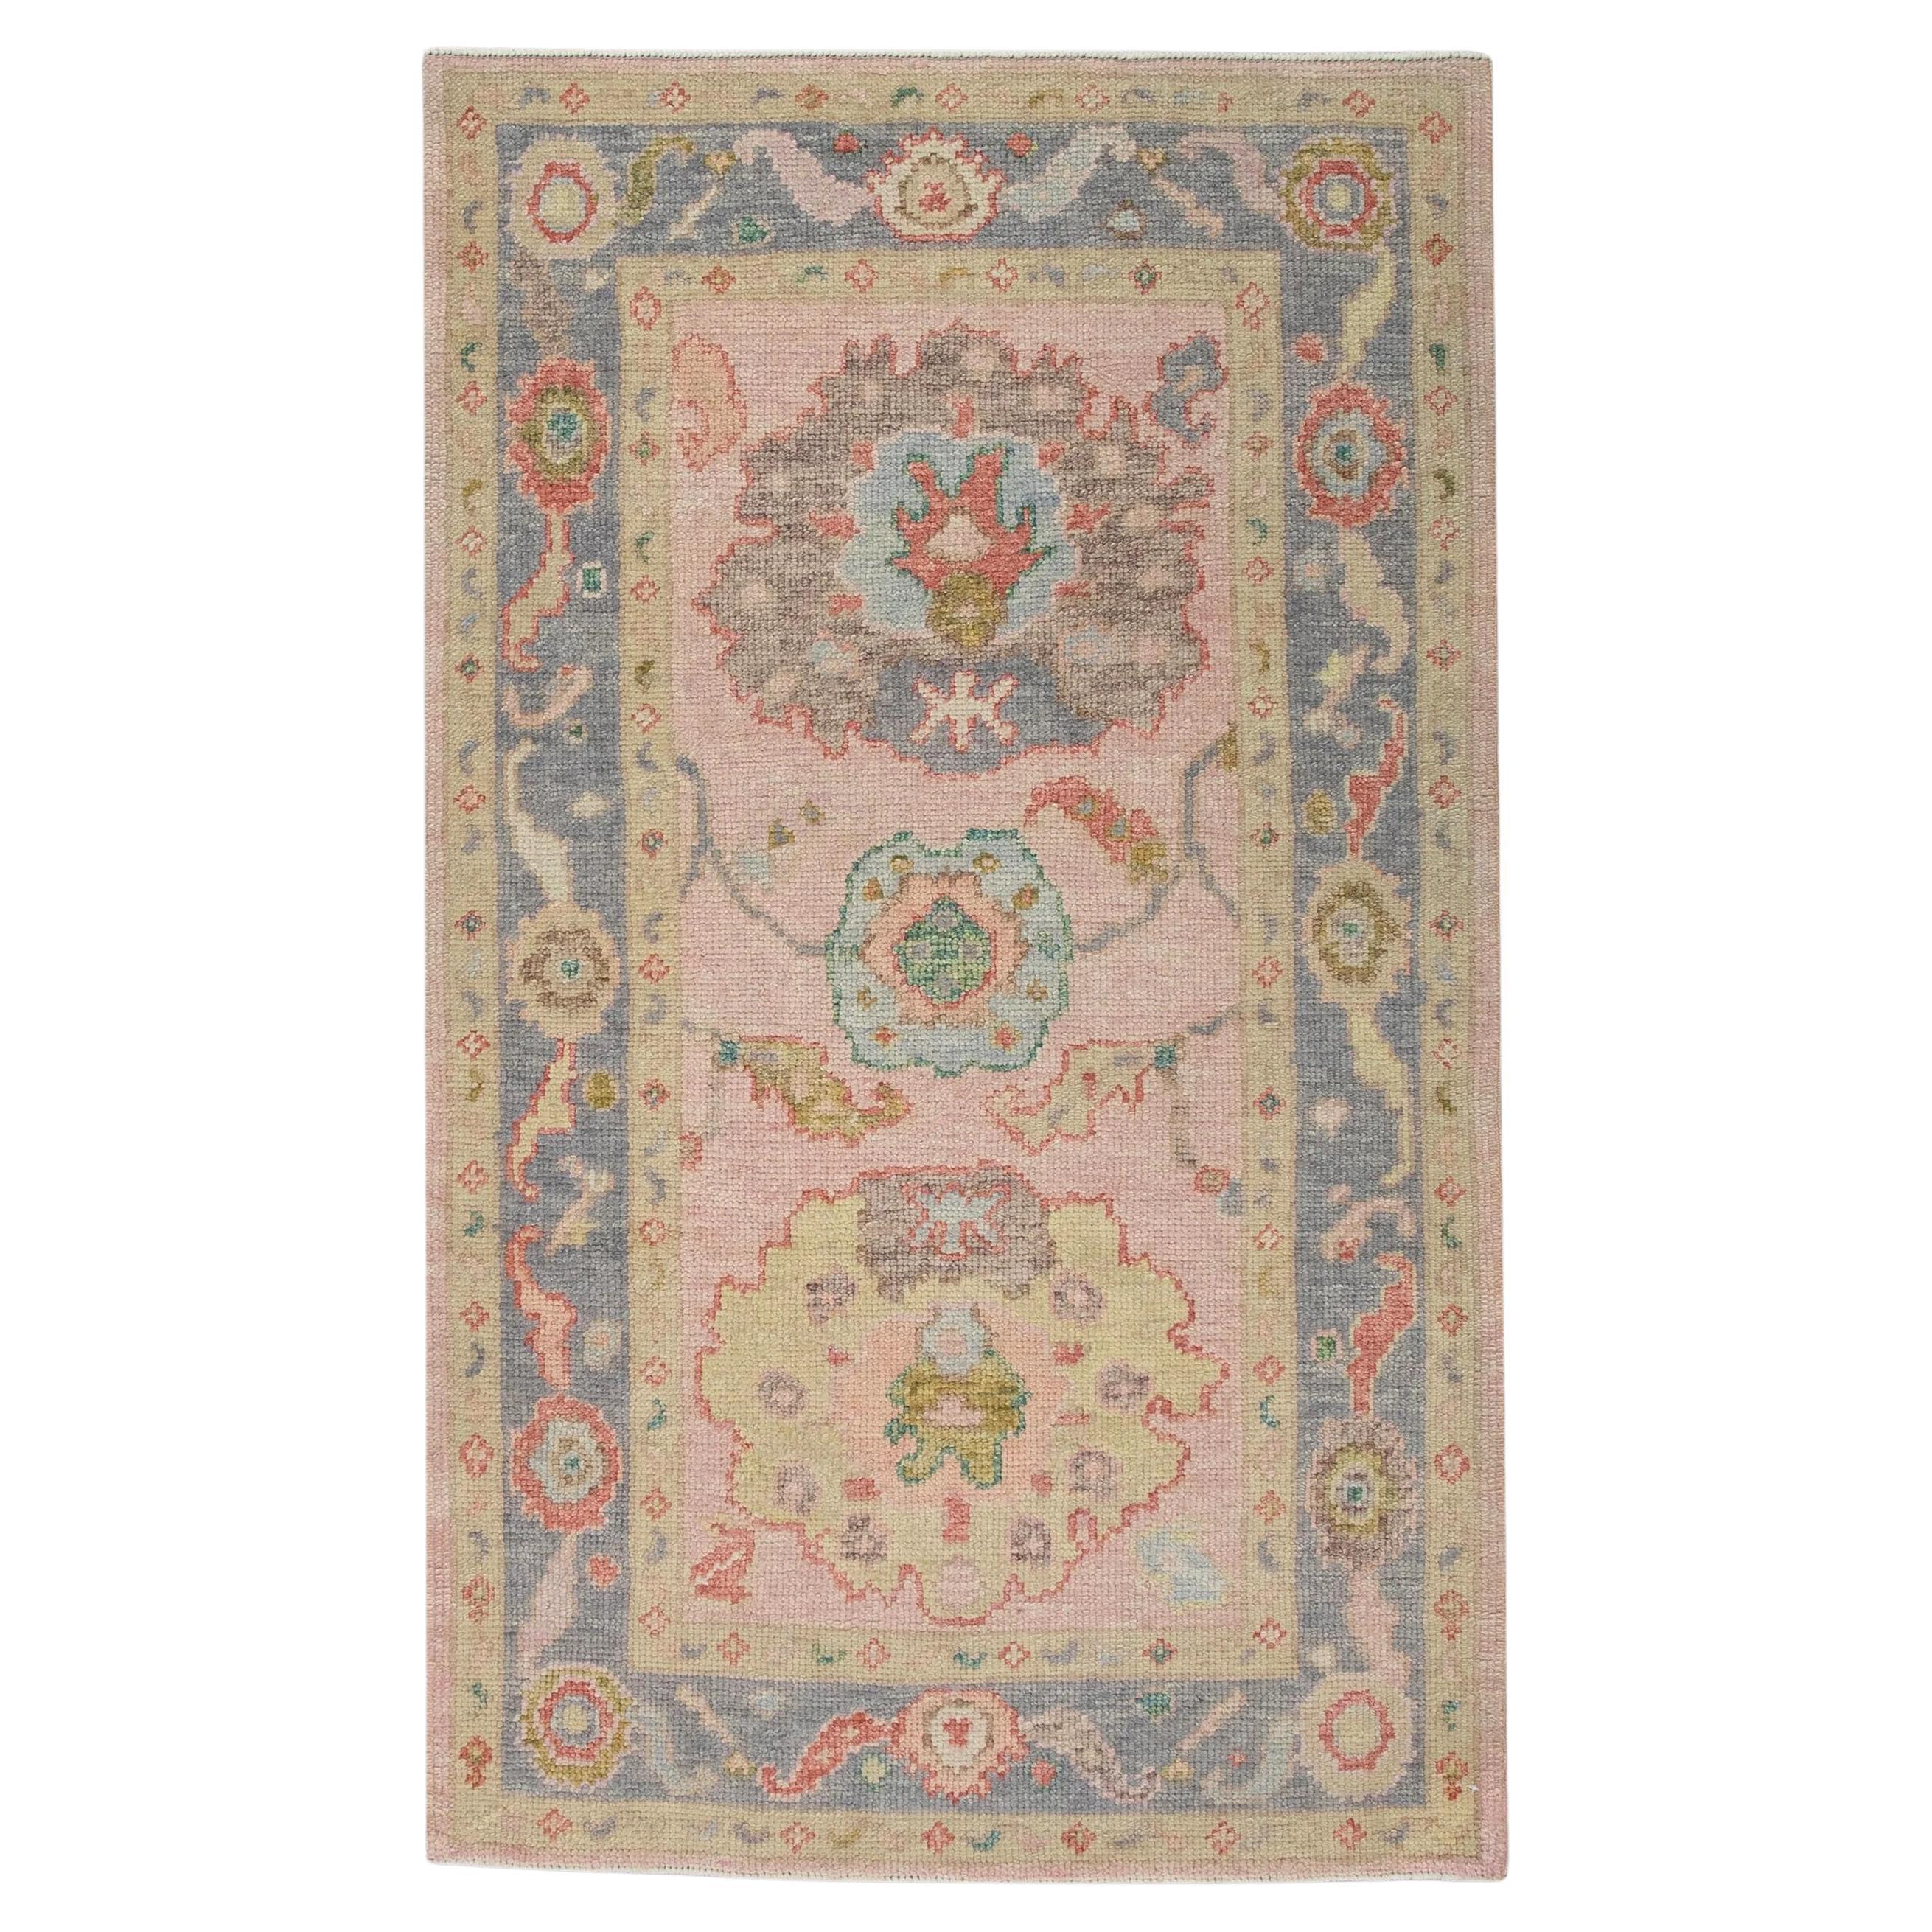 Soft Pink Handwoven Wool Turkish Oushak Rug in Floral Pattern 3' x 4'10"